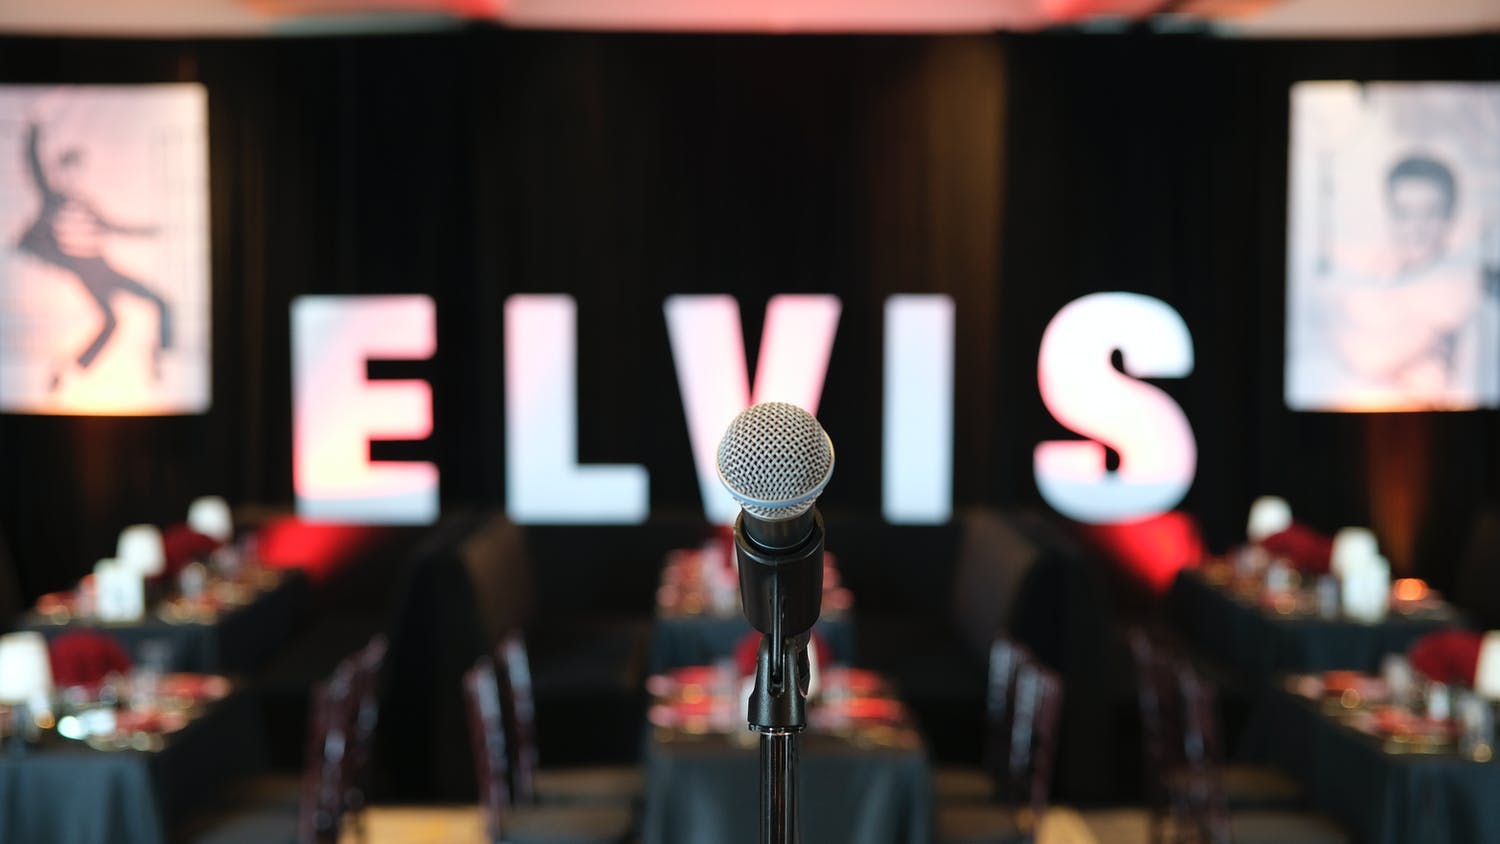 Elvis Inspired Party with Light Up Letters and Stage | PartySlate